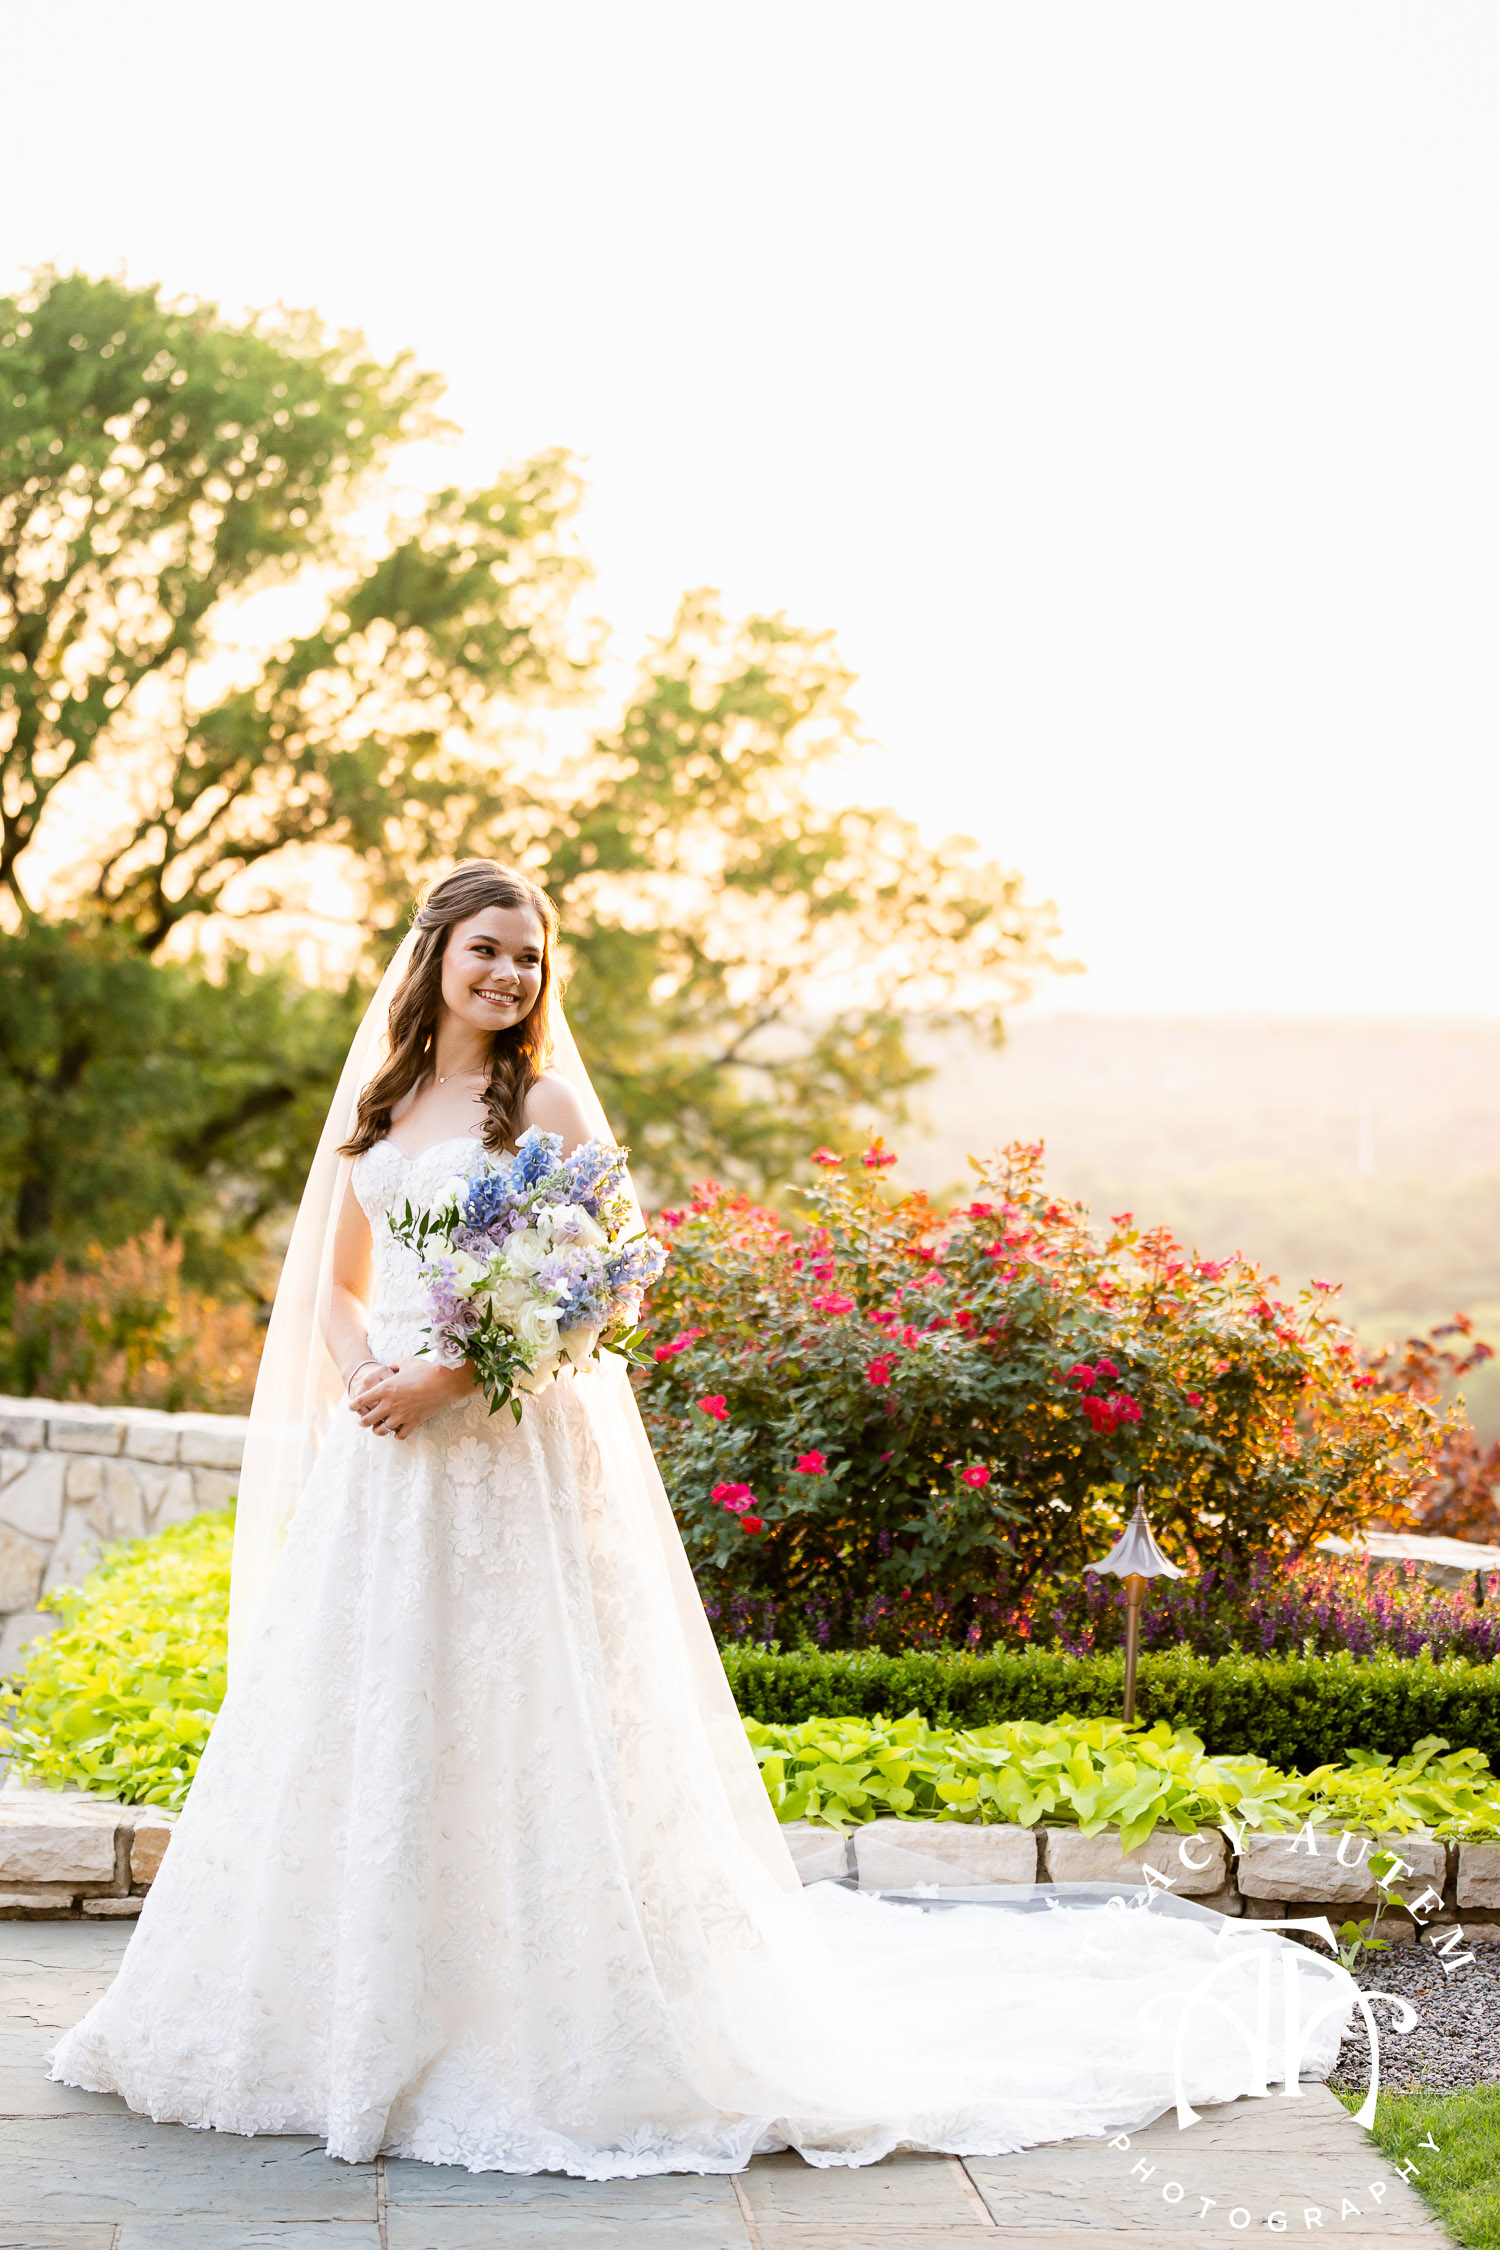 Bridal portrait at sunset at brides home in Rivercrest Fort Worth texas